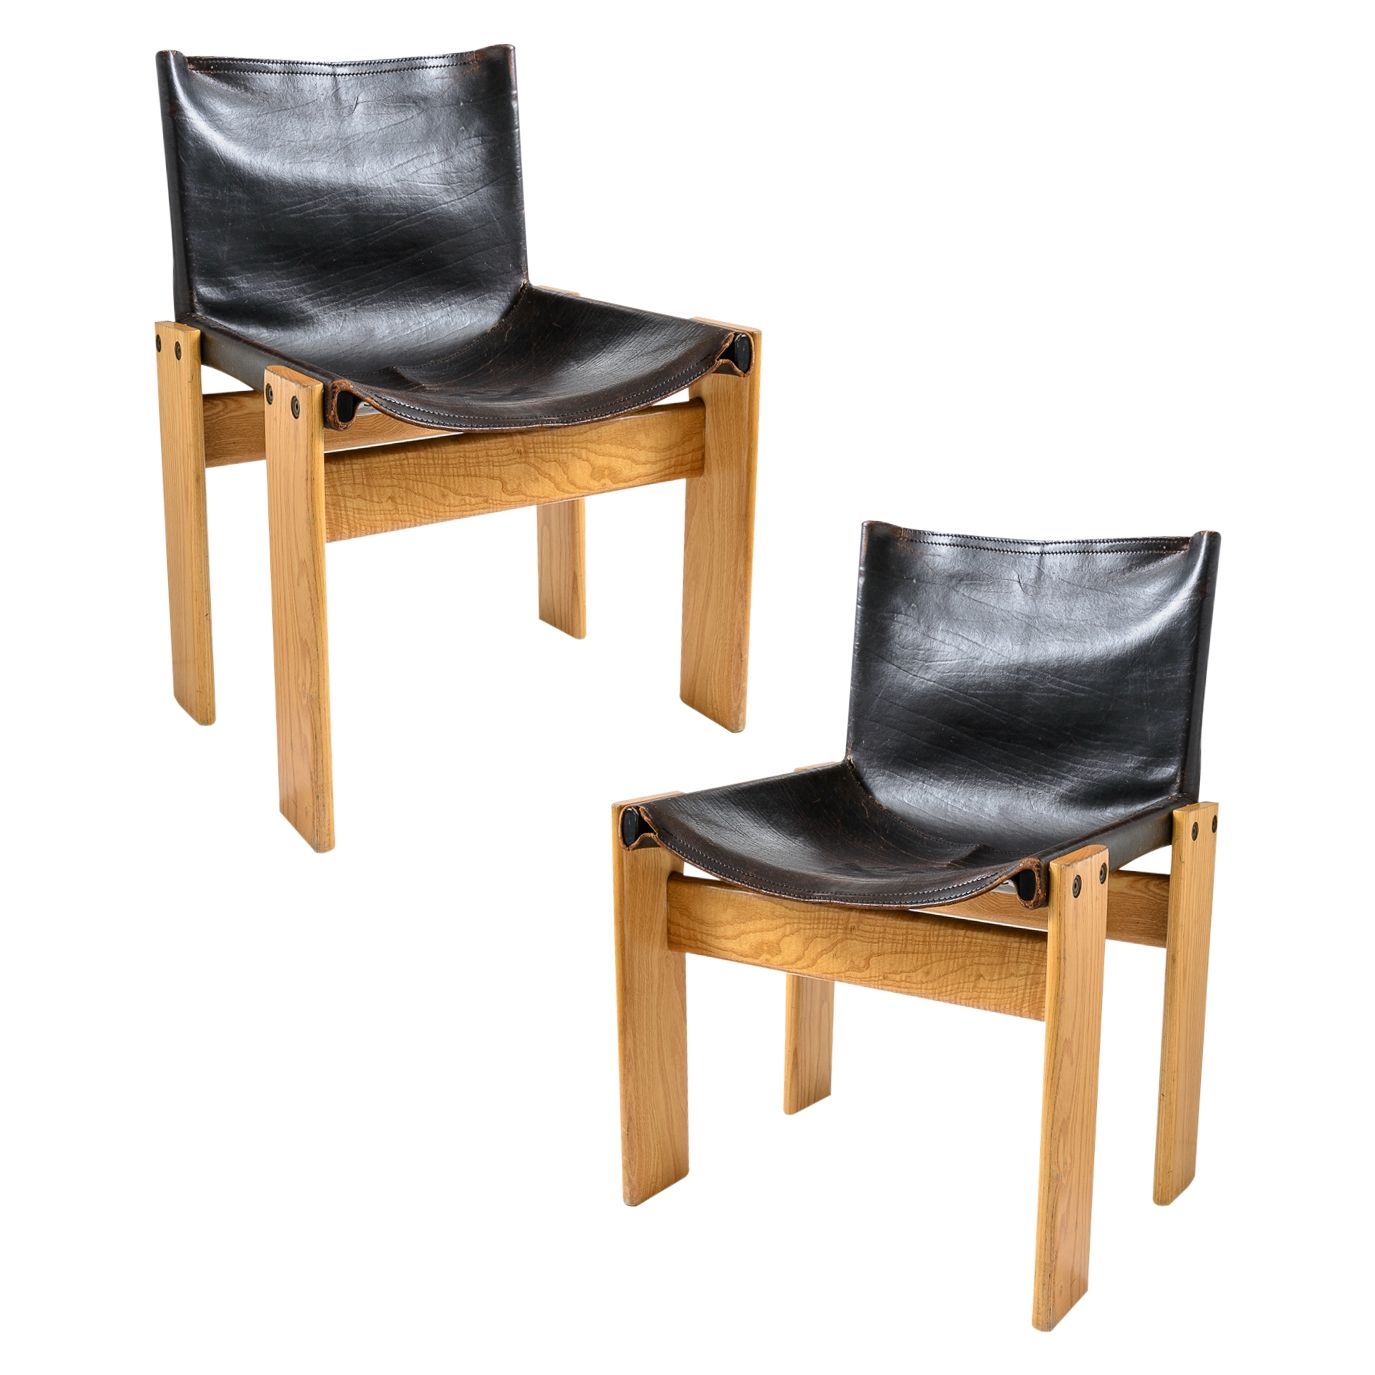 Monk Chairs Afra And Tobia Scarpa For Molteni On Antique Row Inside Monk Chairs (View 7 of 15)